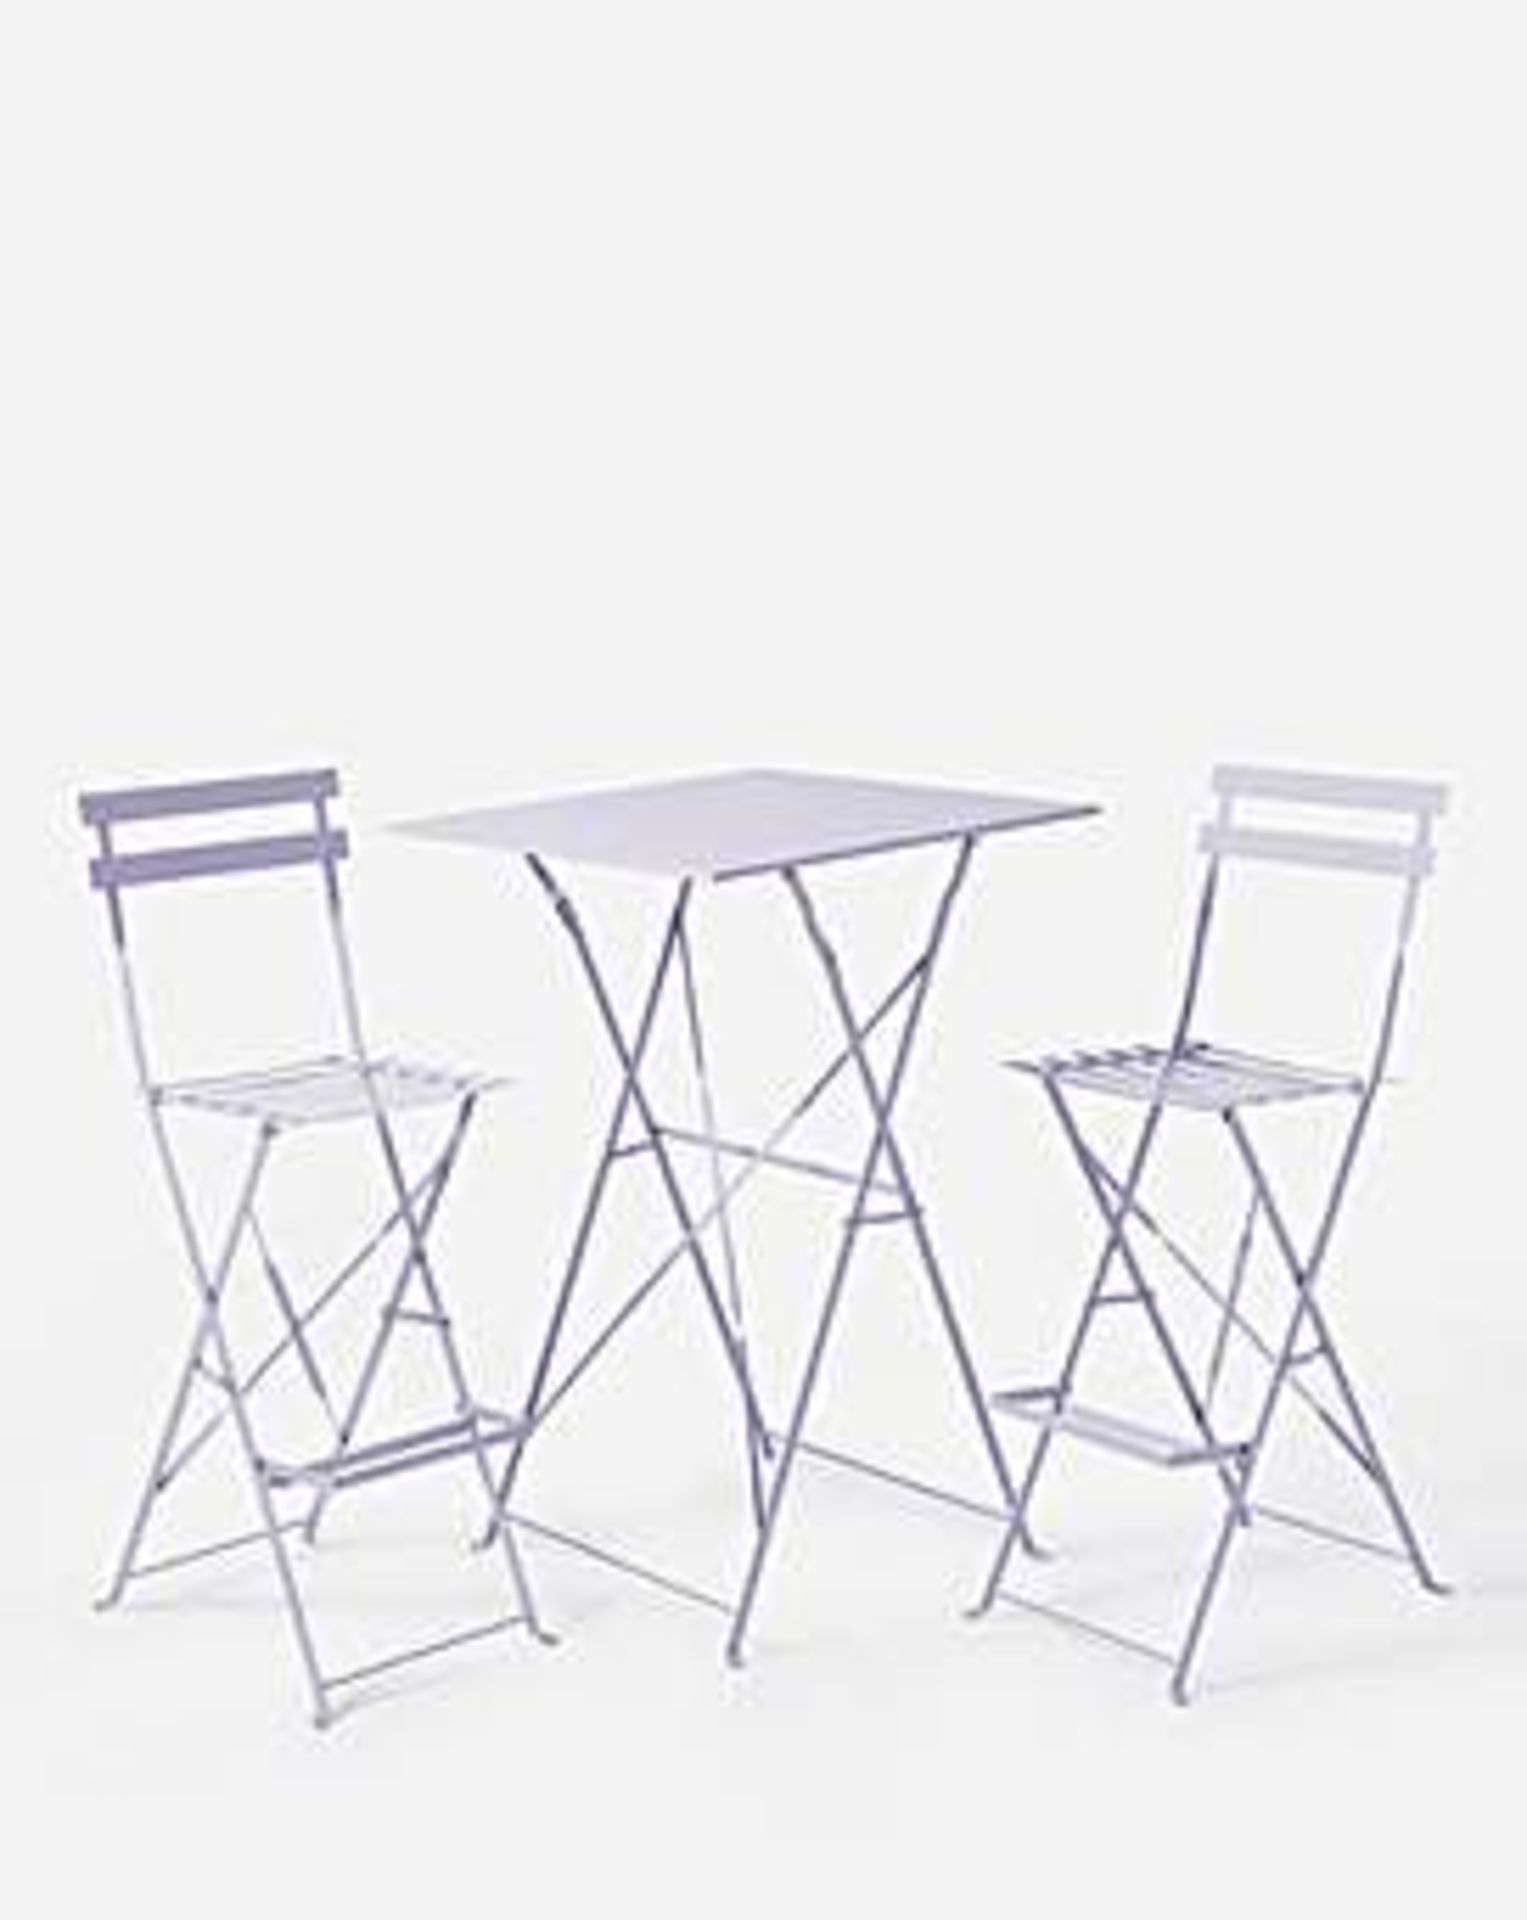 TRADE PALLET TO CONTAIN 6x BRAND NEW Palma Bistro Bar Set LILAC RRP £159 EACH - Image 2 of 3